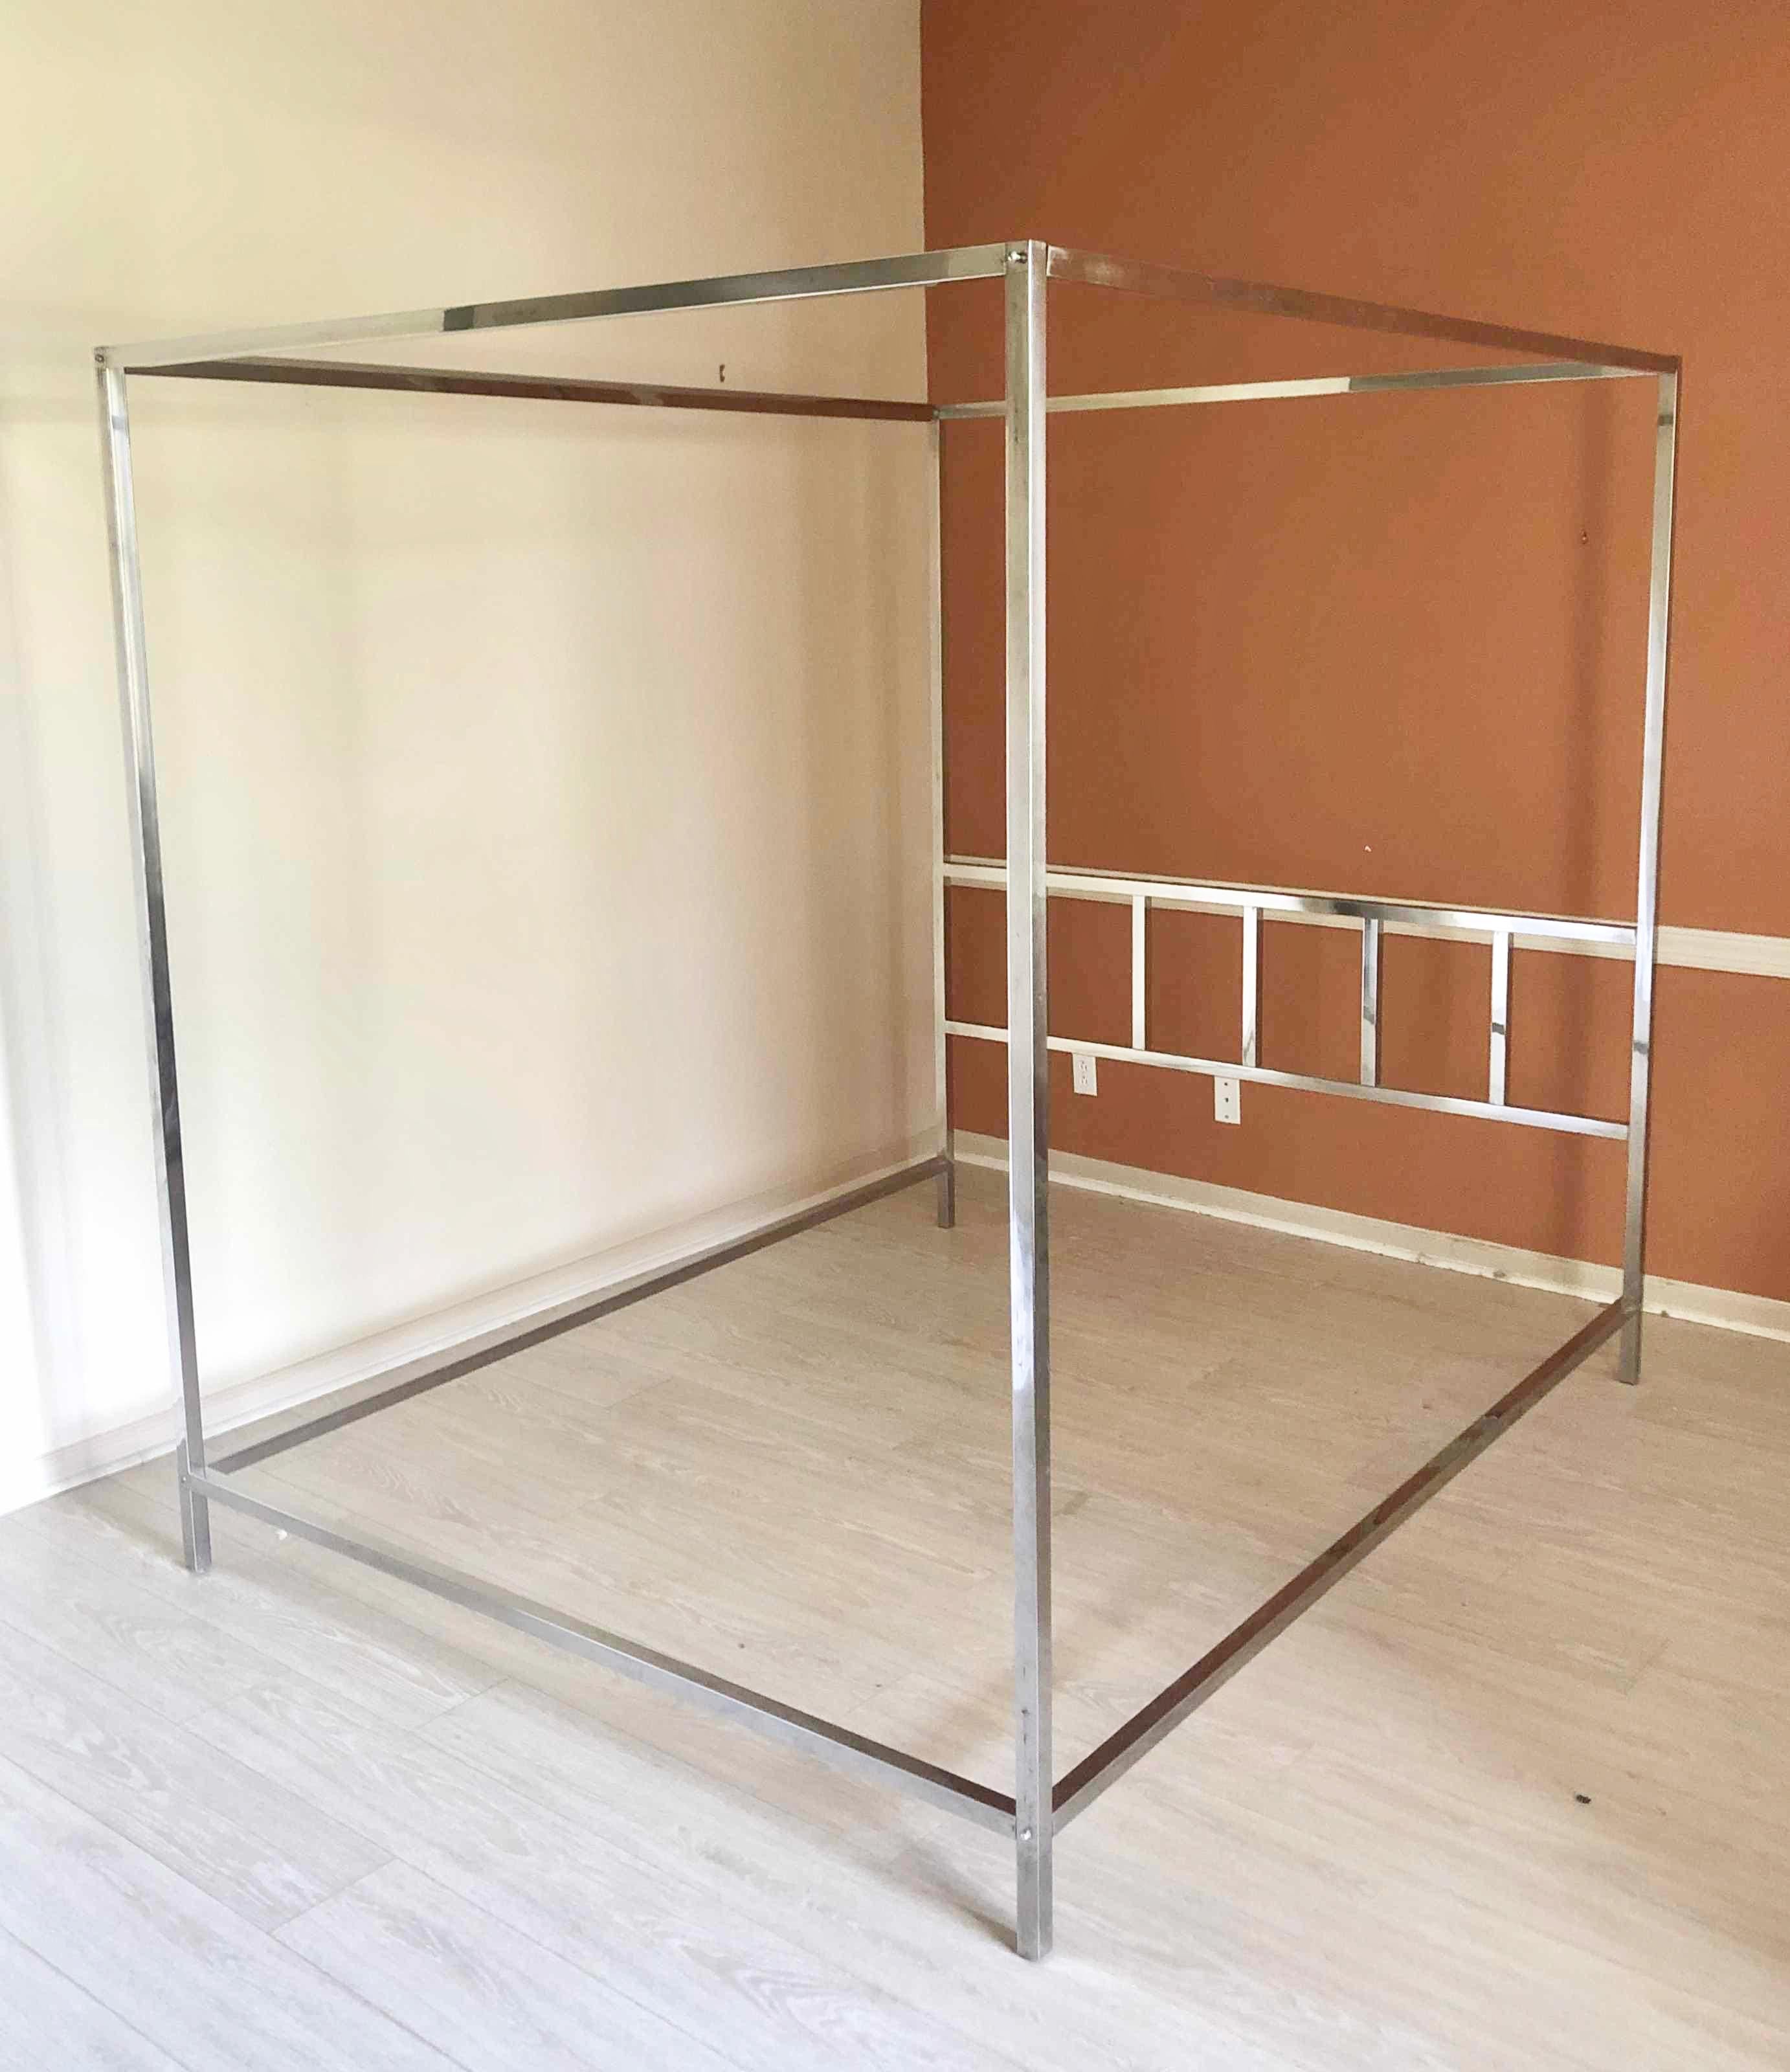 Chic and glamorous queen size, 1970's polished chrome canopy four poster bed frame by Pace Collection.

Available separately, we also have a Pace Collection Chrome Canopy King size bed frame